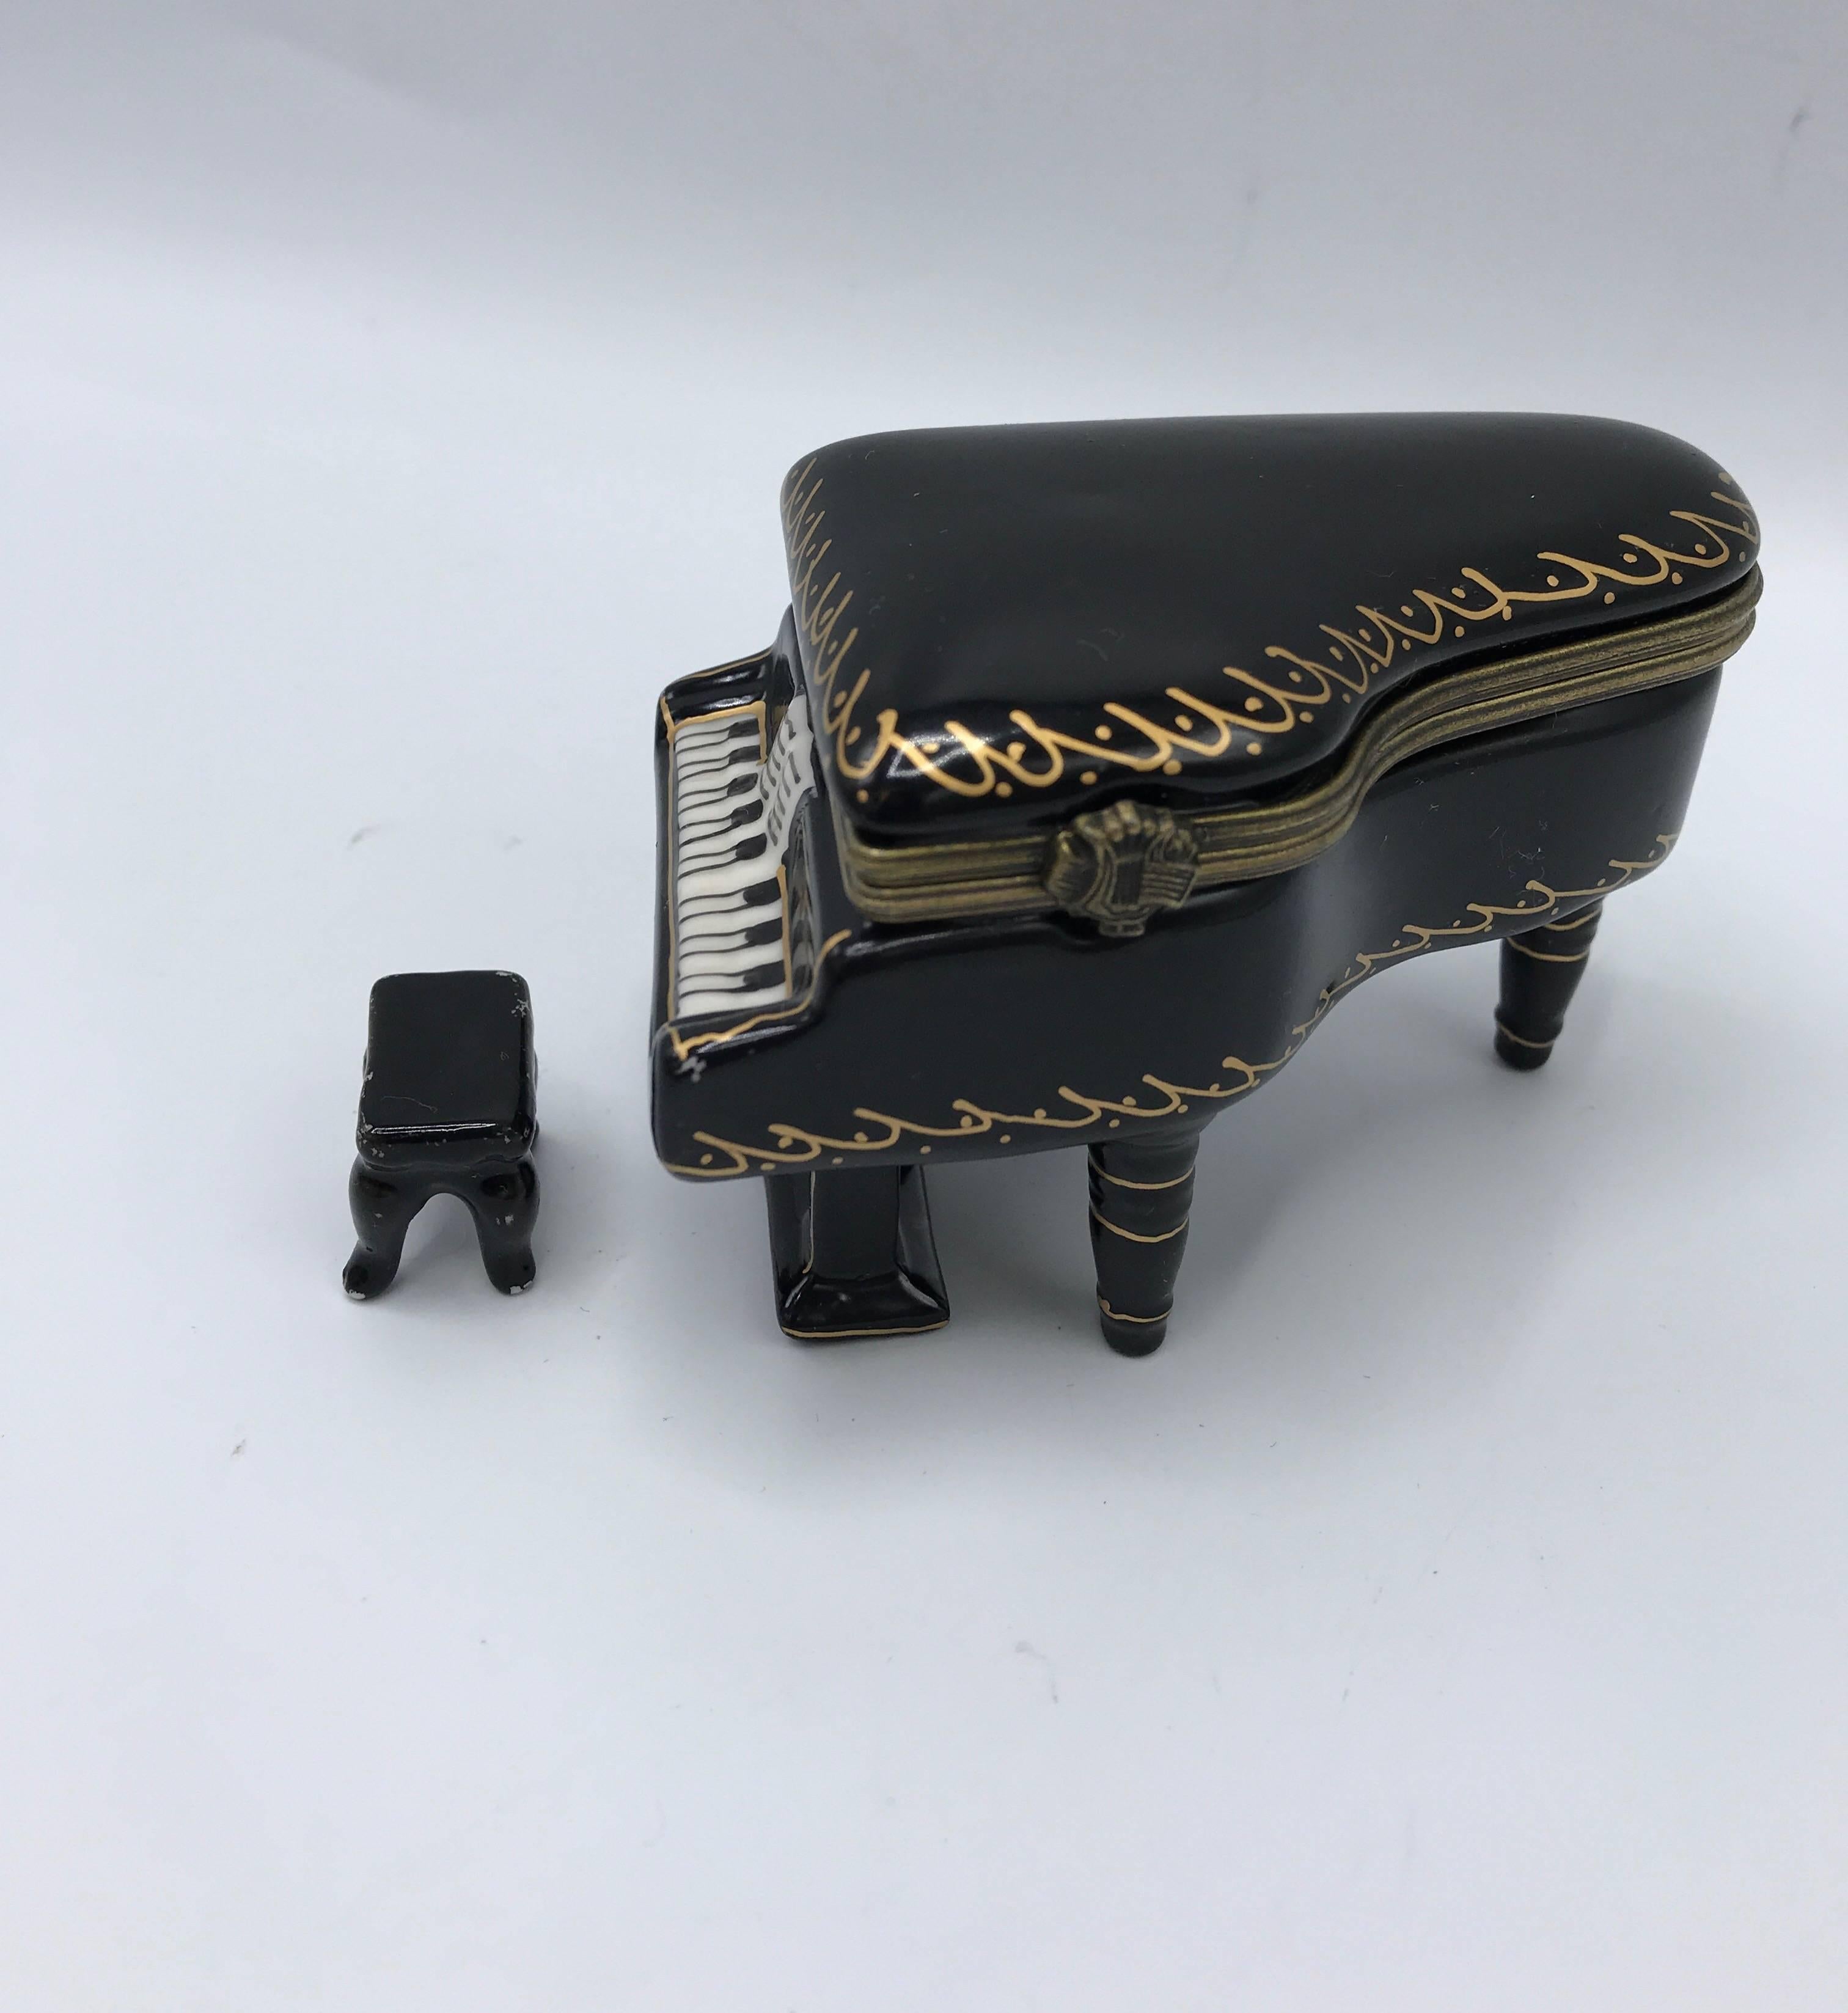 Offered is an exquisite, 1960s French Limoges-style black and gold porcelain trinket box, in the shape of a grand piano. Includes a matching, miniature to-scale piano bench. Clasp and hinge are in excellent condition, still closing tightly.